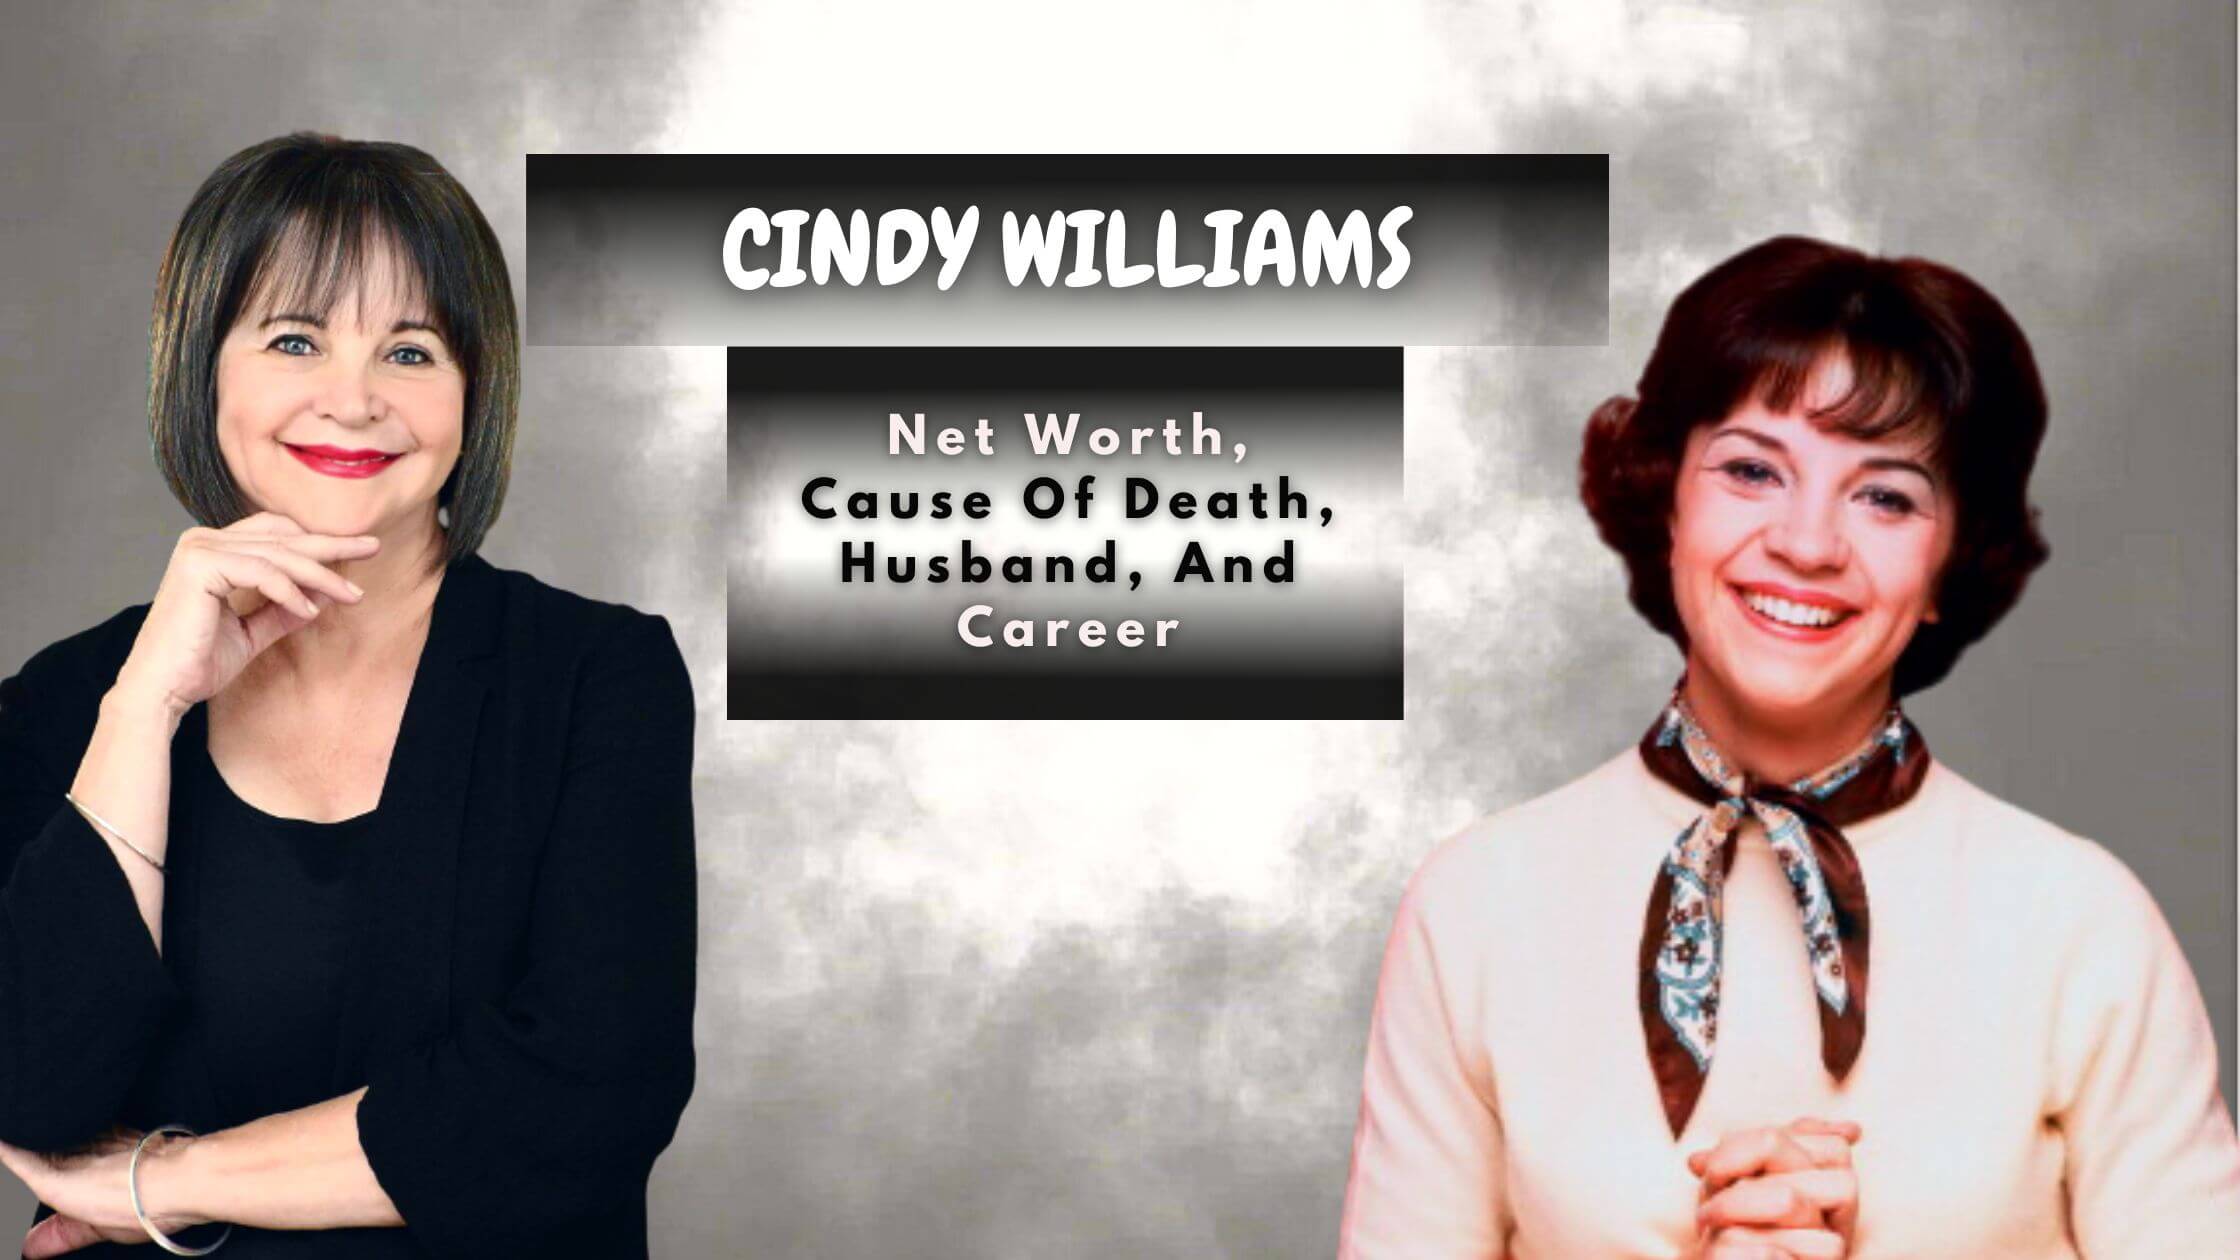 Cindy Williams Net Worth, Cause Of Death, Husband, And Career